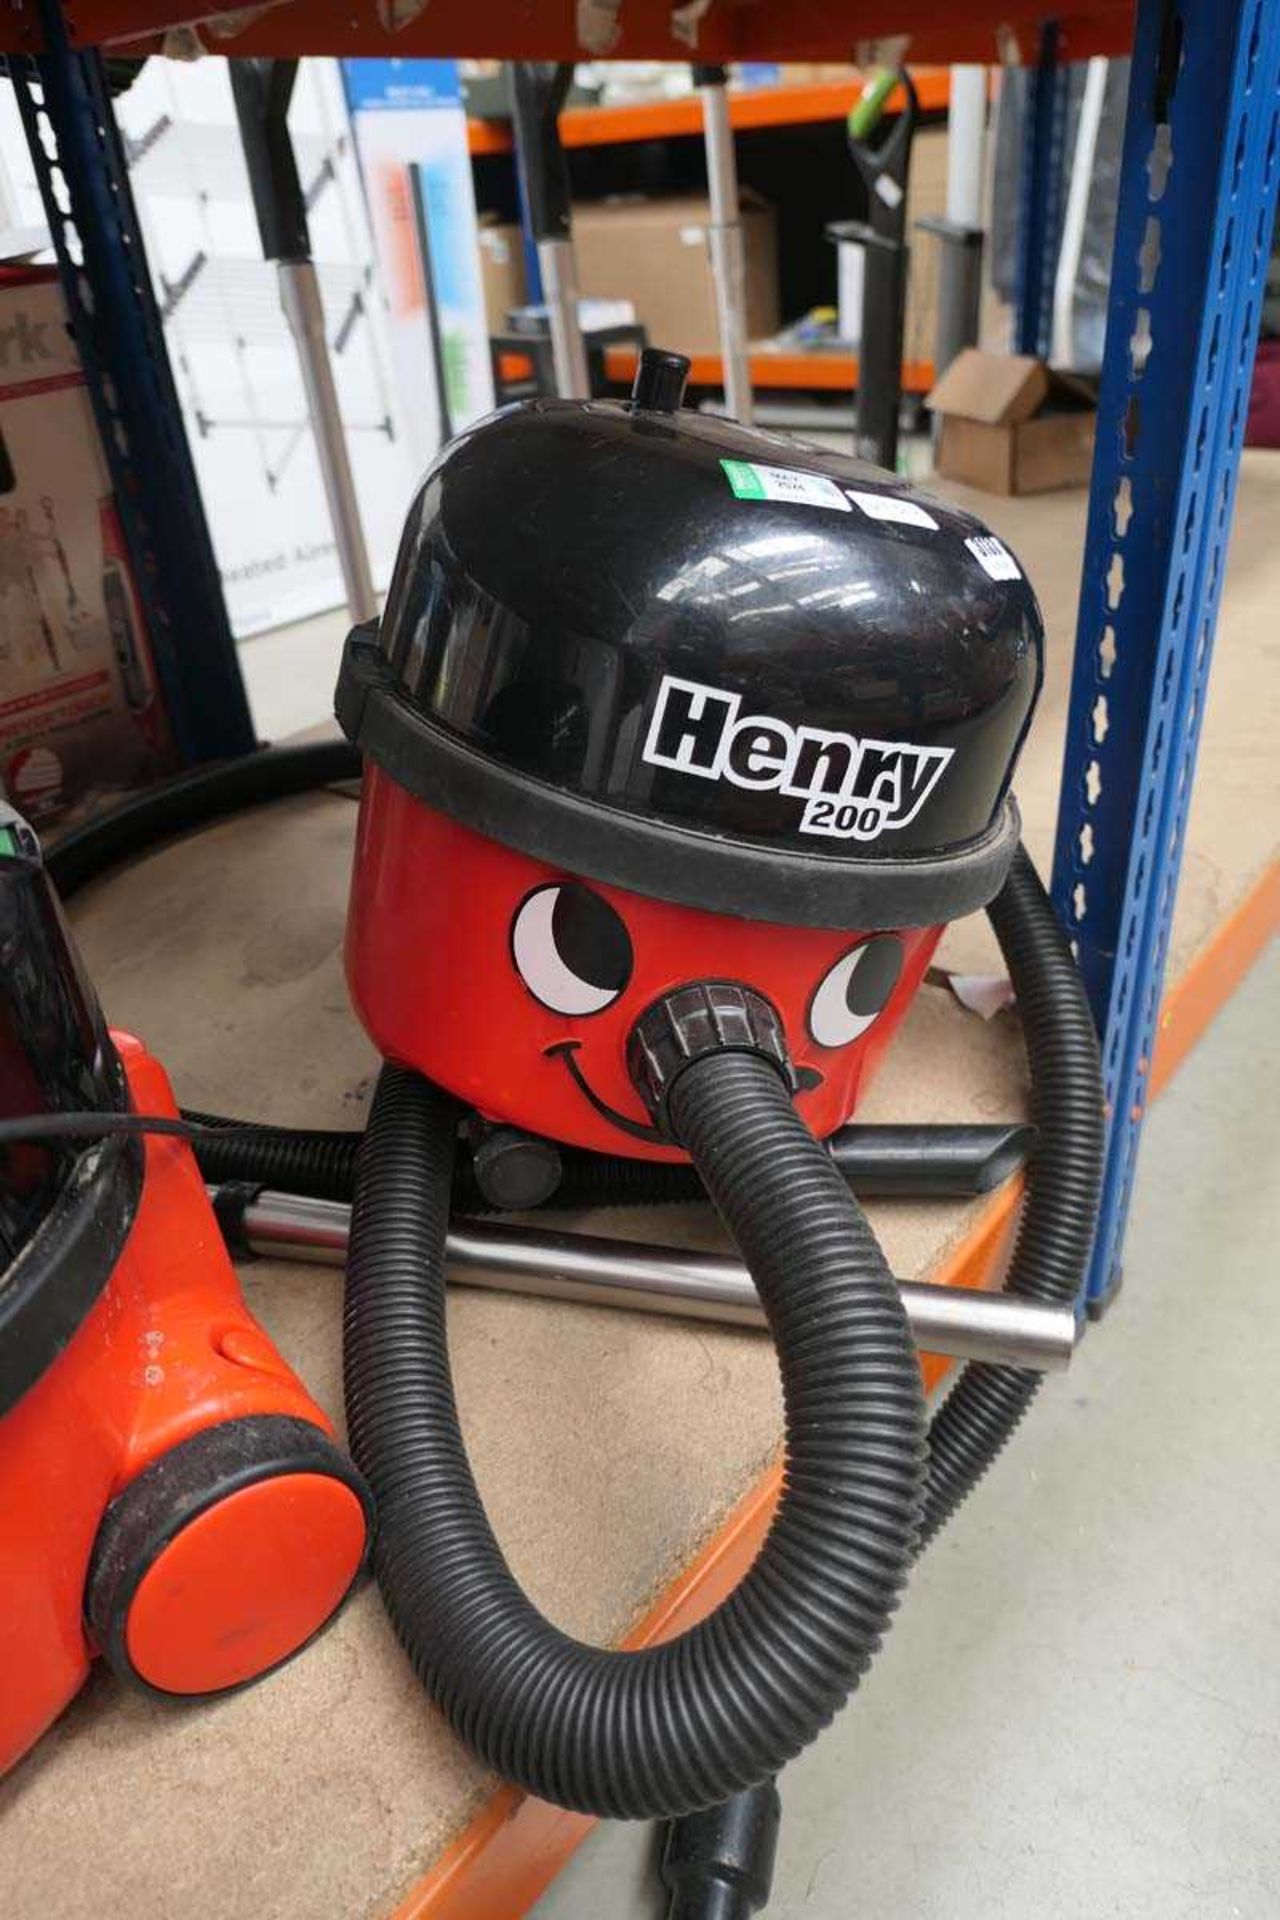 Henry 200 vacuum cleaner, no pole